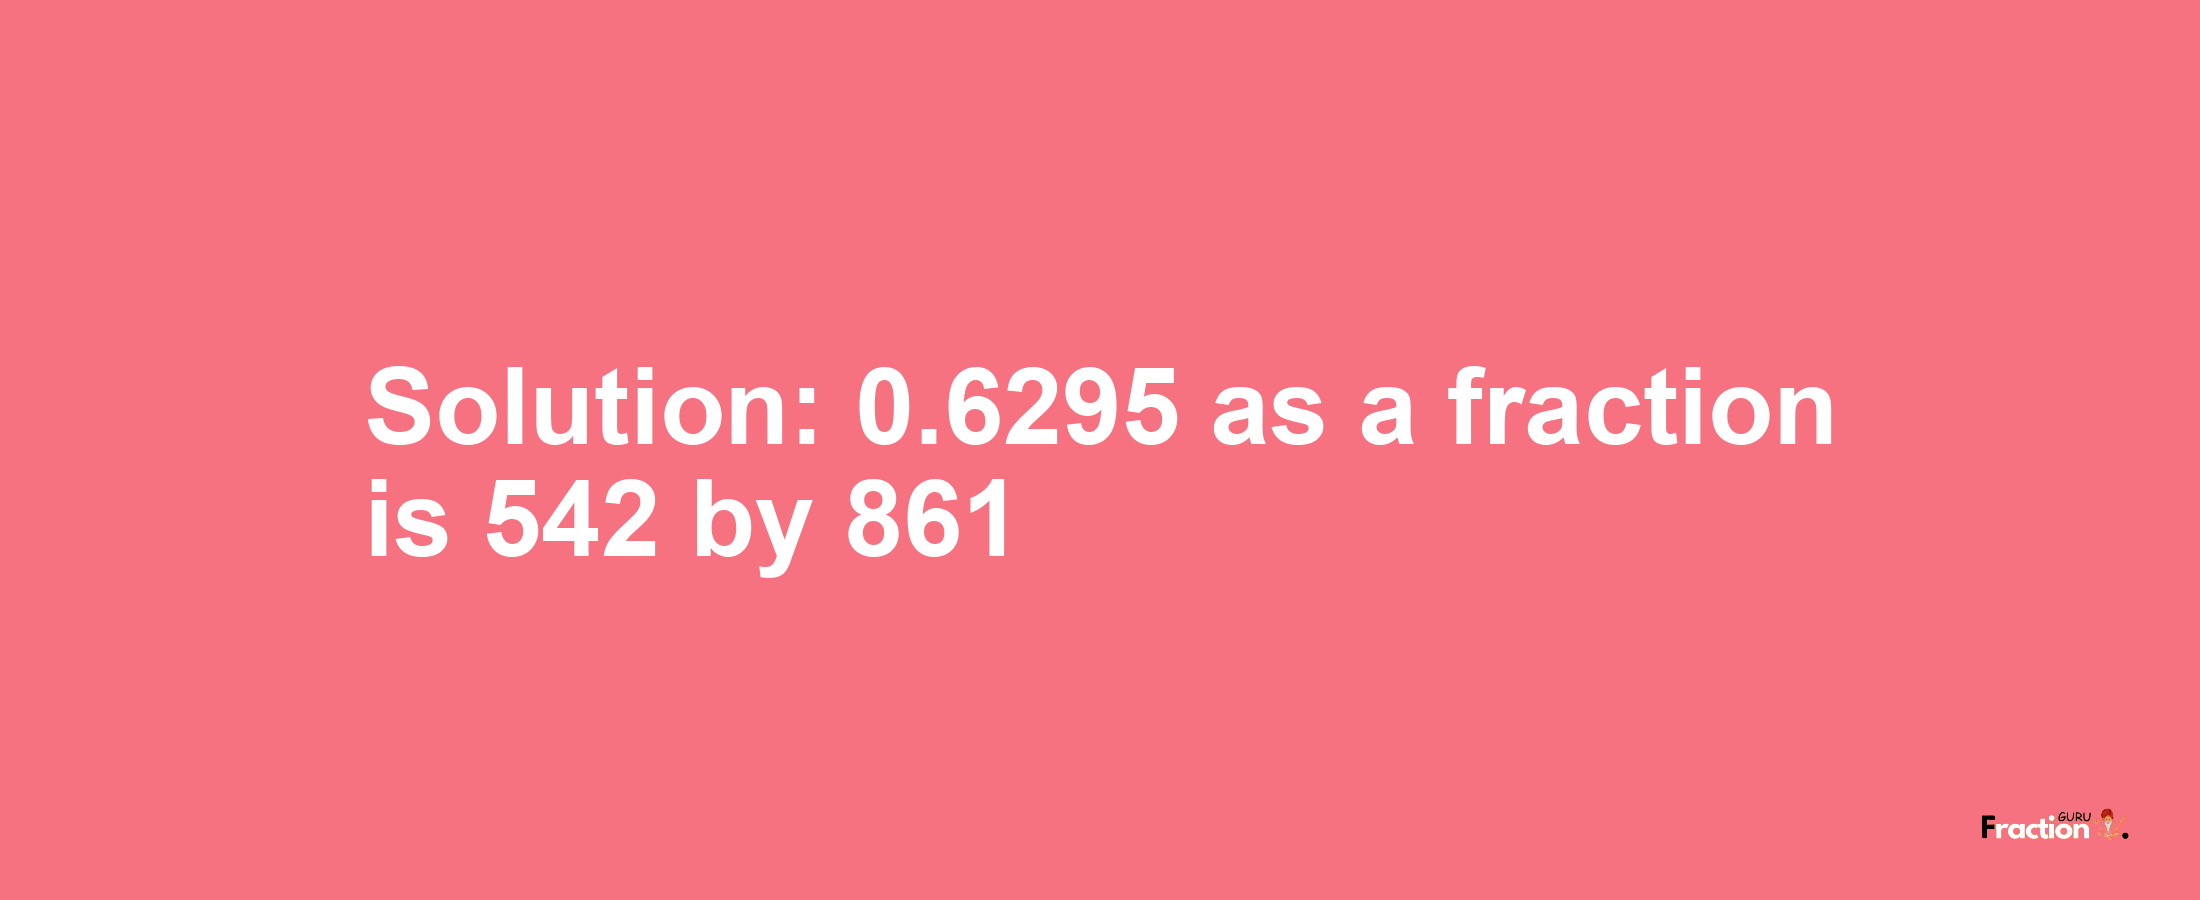 Solution:0.6295 as a fraction is 542/861